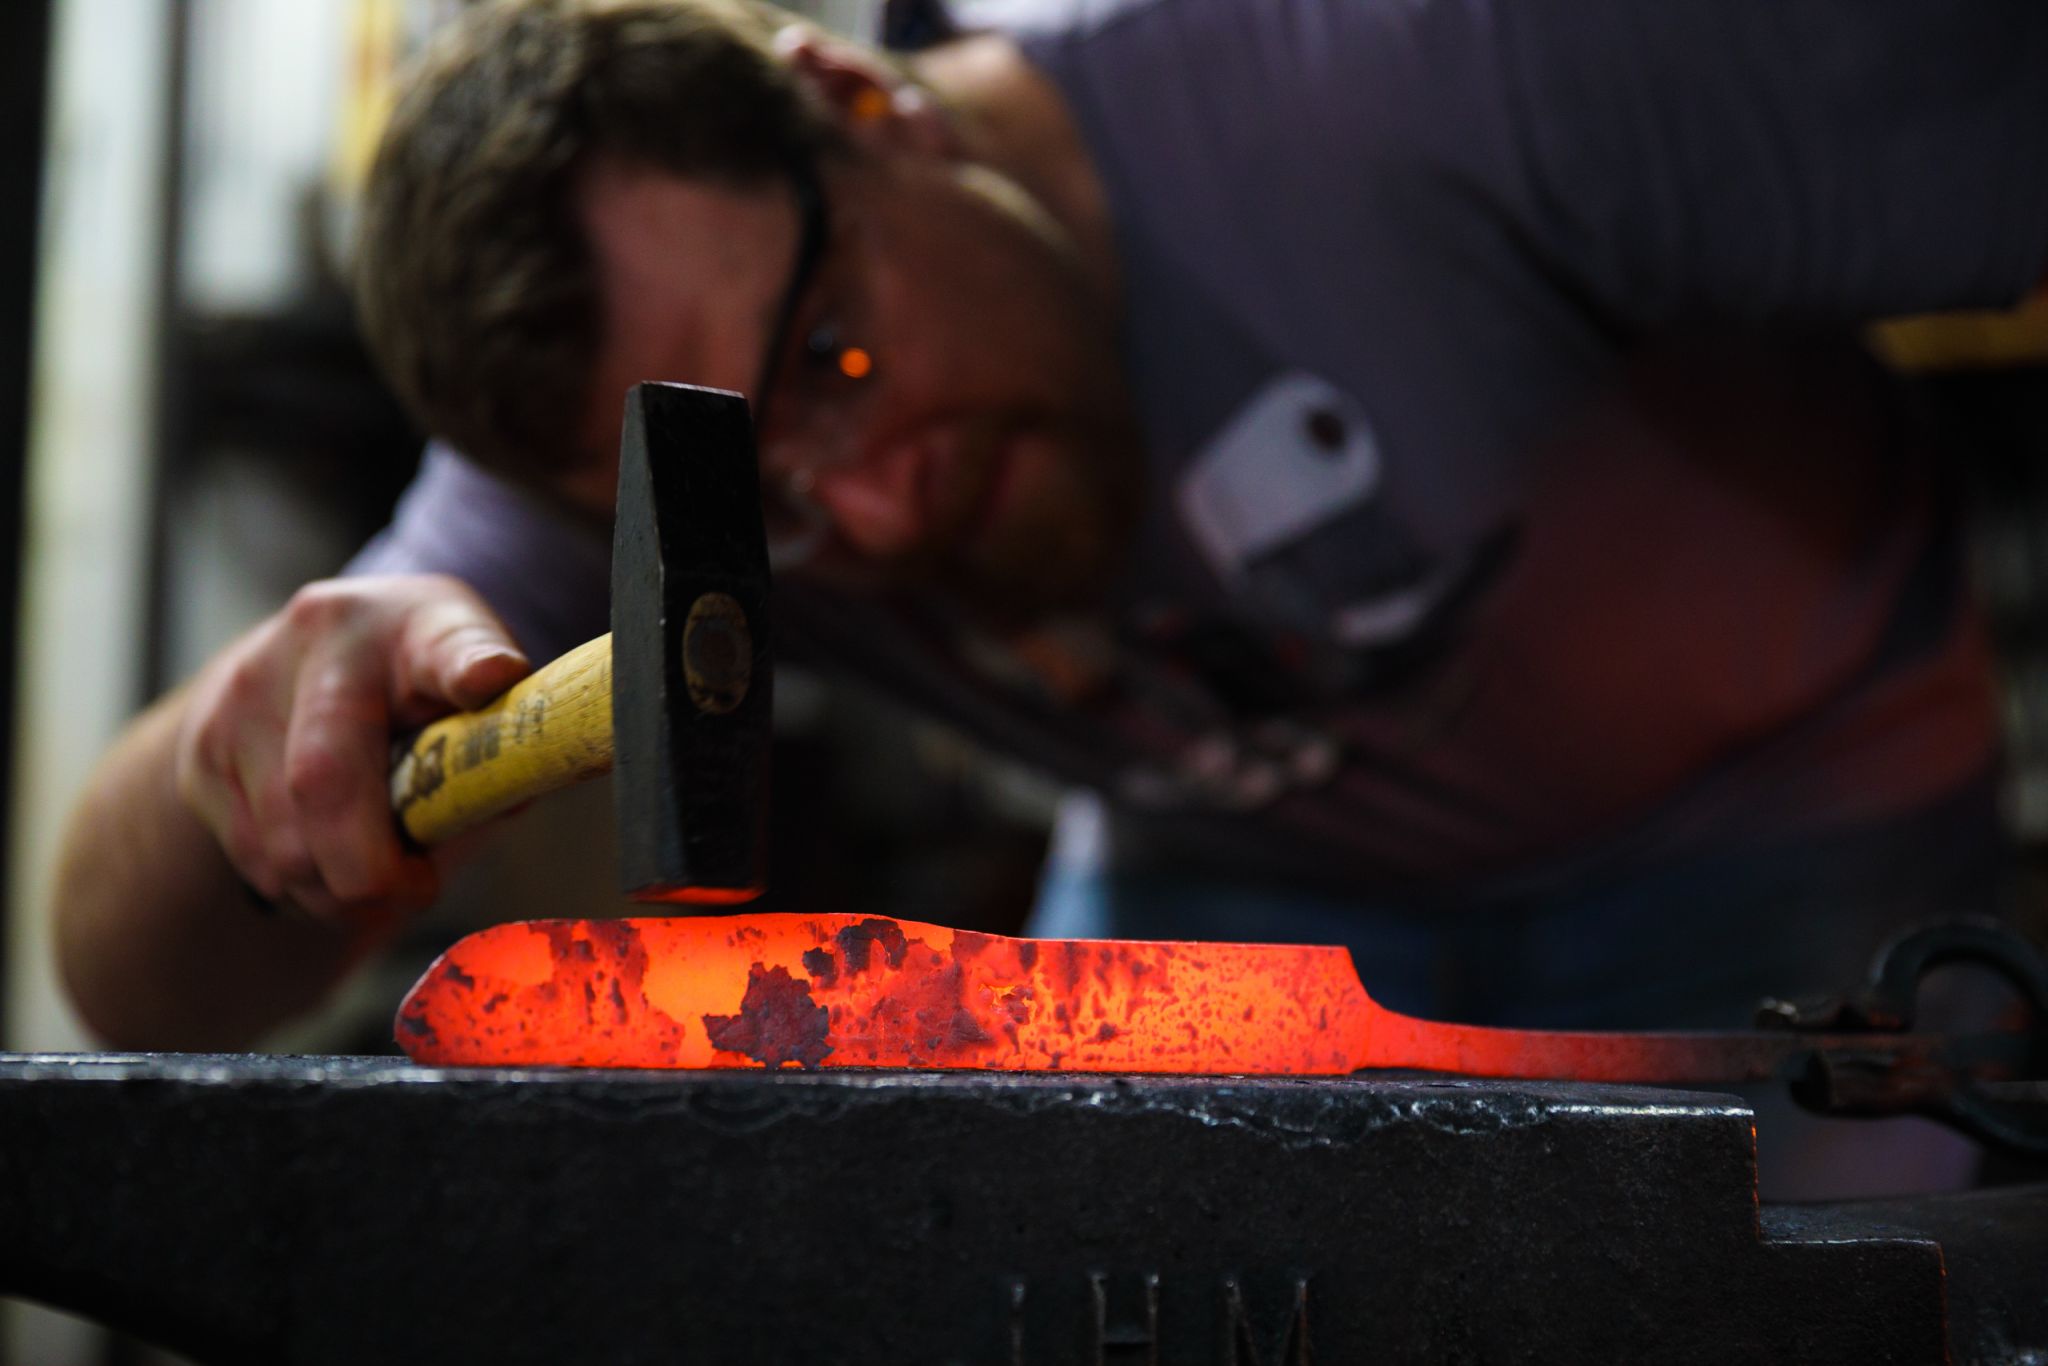 forge welding